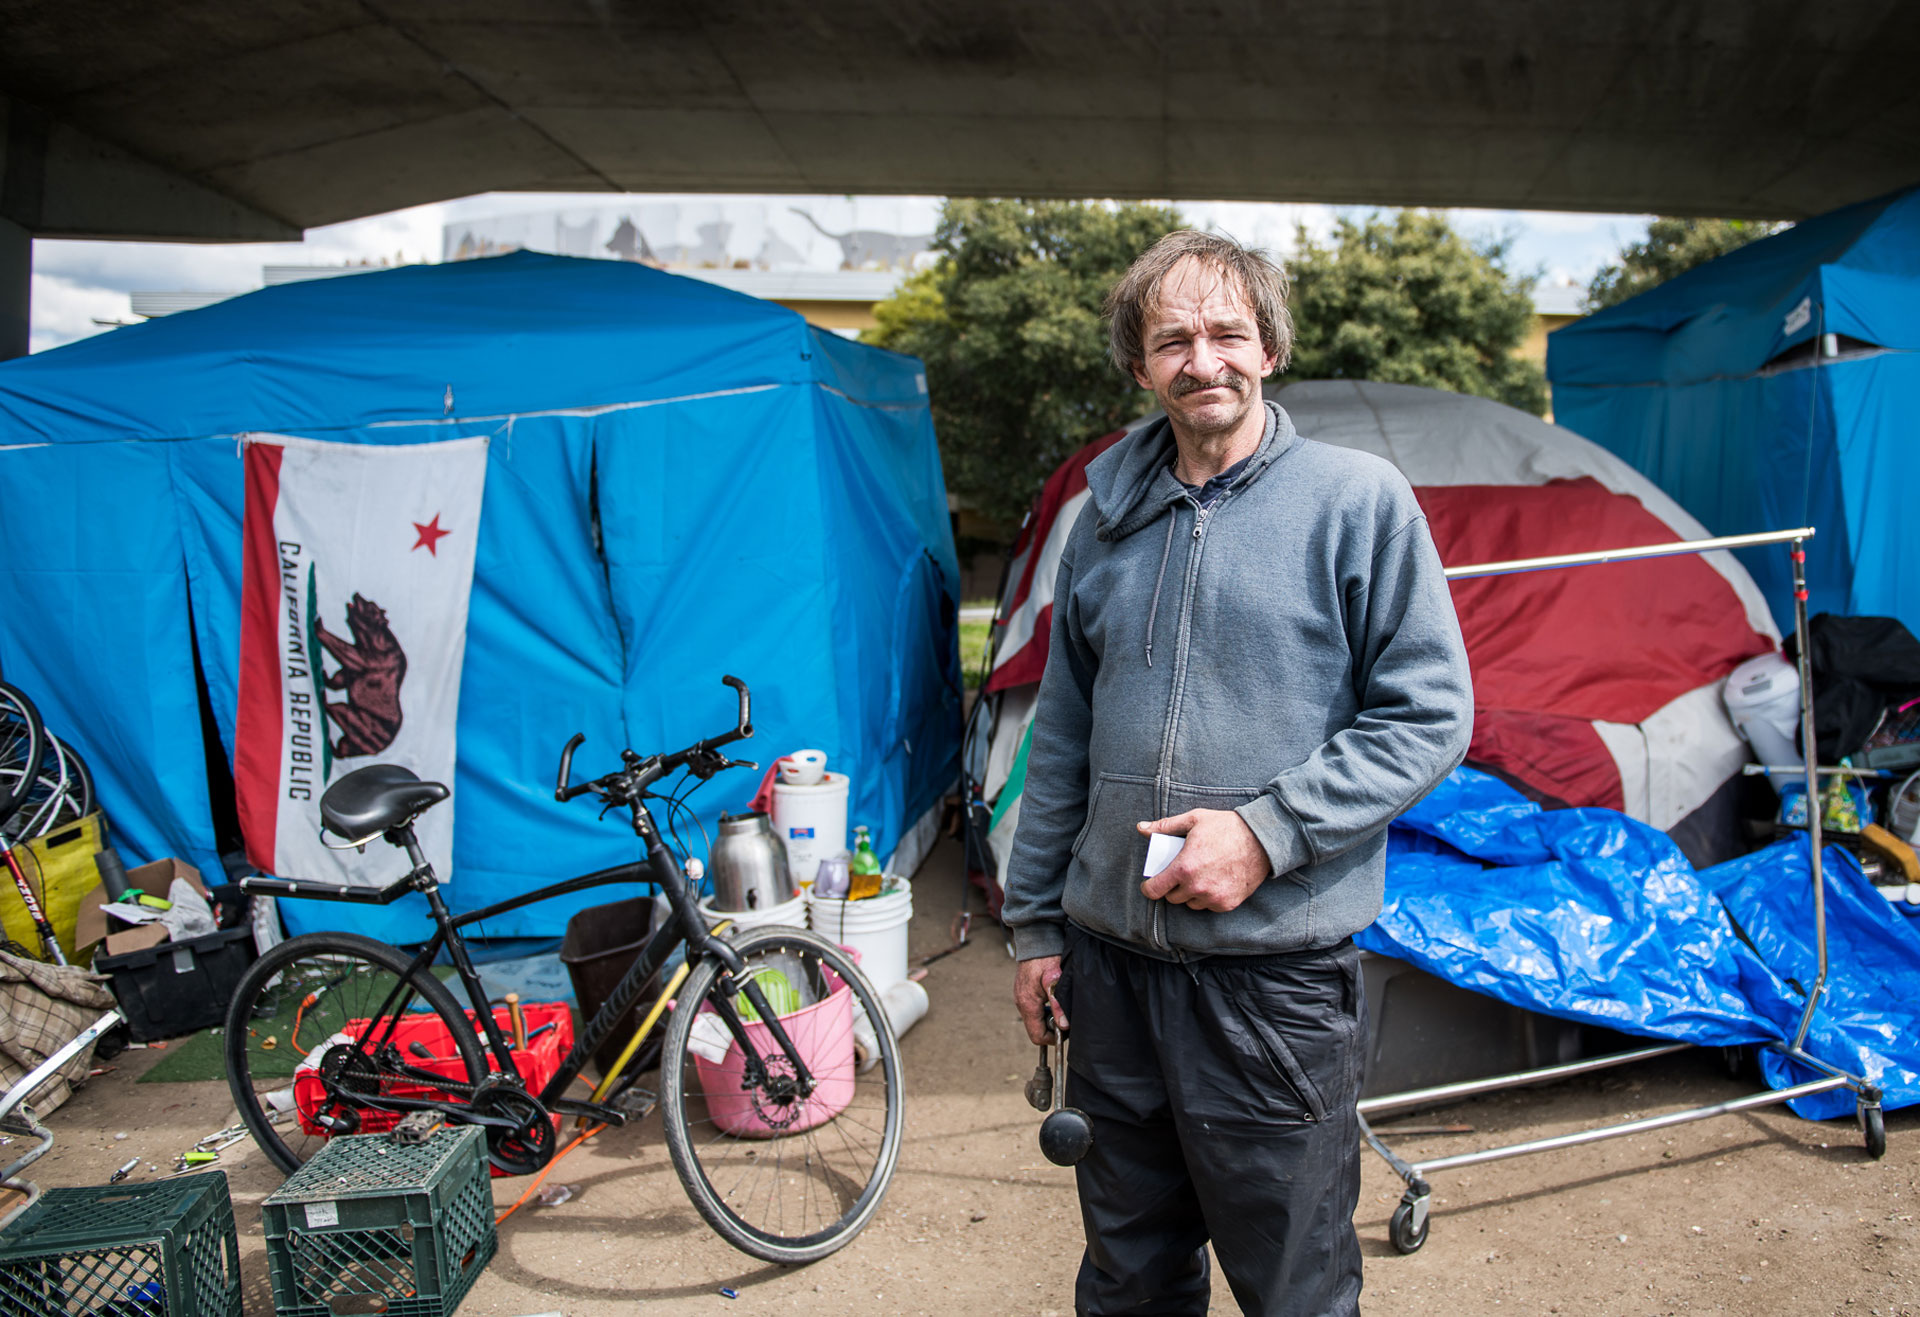 Kevin Coddington, 52, at the tent encampment where he lives under a freeway overpass in Berkeley on Mar. 19, 2020. When asked about outreach to his community in response to the coronavirus crisis, he said, "It's very scary. They haven't given us anything." He said that private donations were all that they had received, which helps them to supply their own portable restrooms, but that they could use running water as well as masks, gloves and sanitizer.